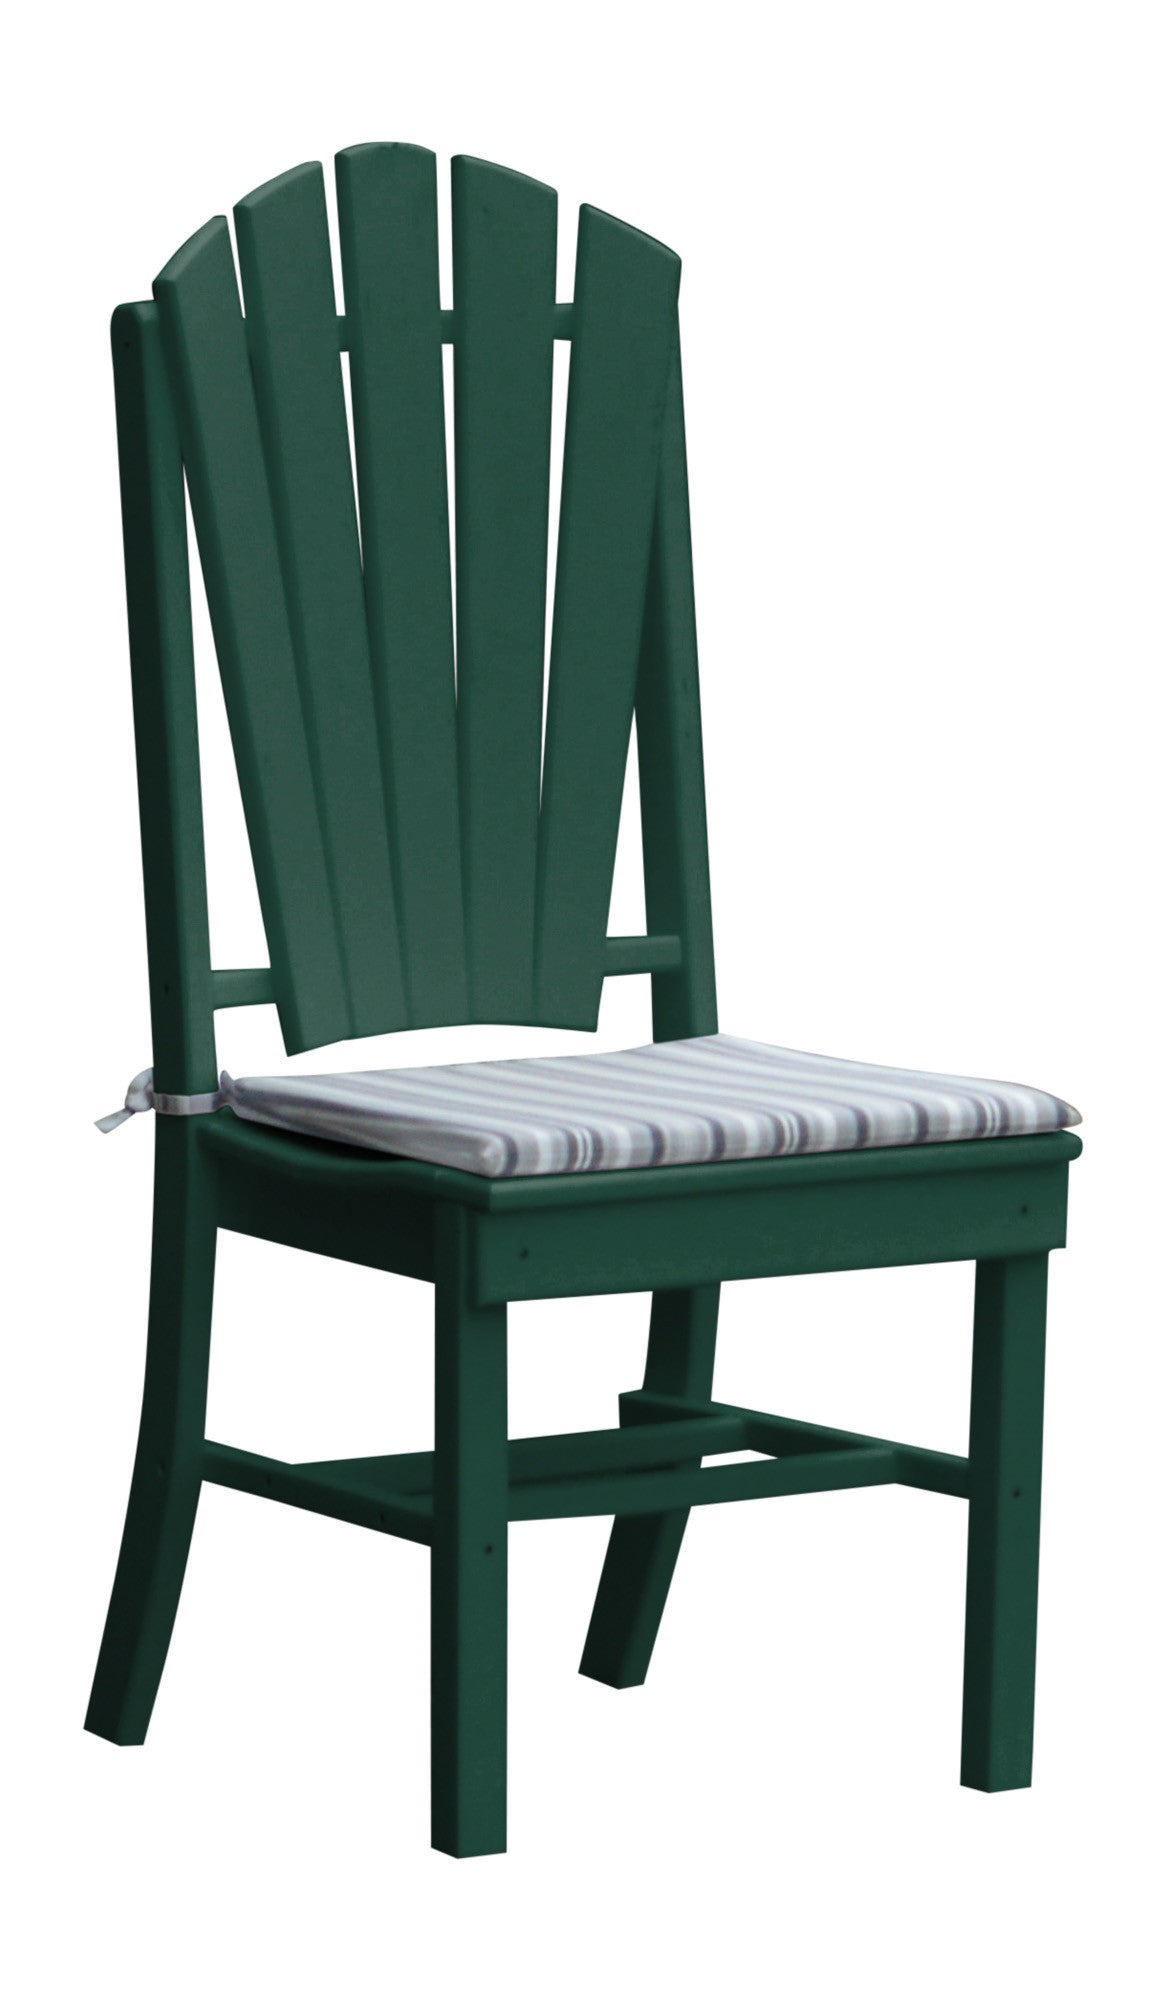 A&L Furniture Company Recycled Plastic Adirondack Dining Chair - Turf Green